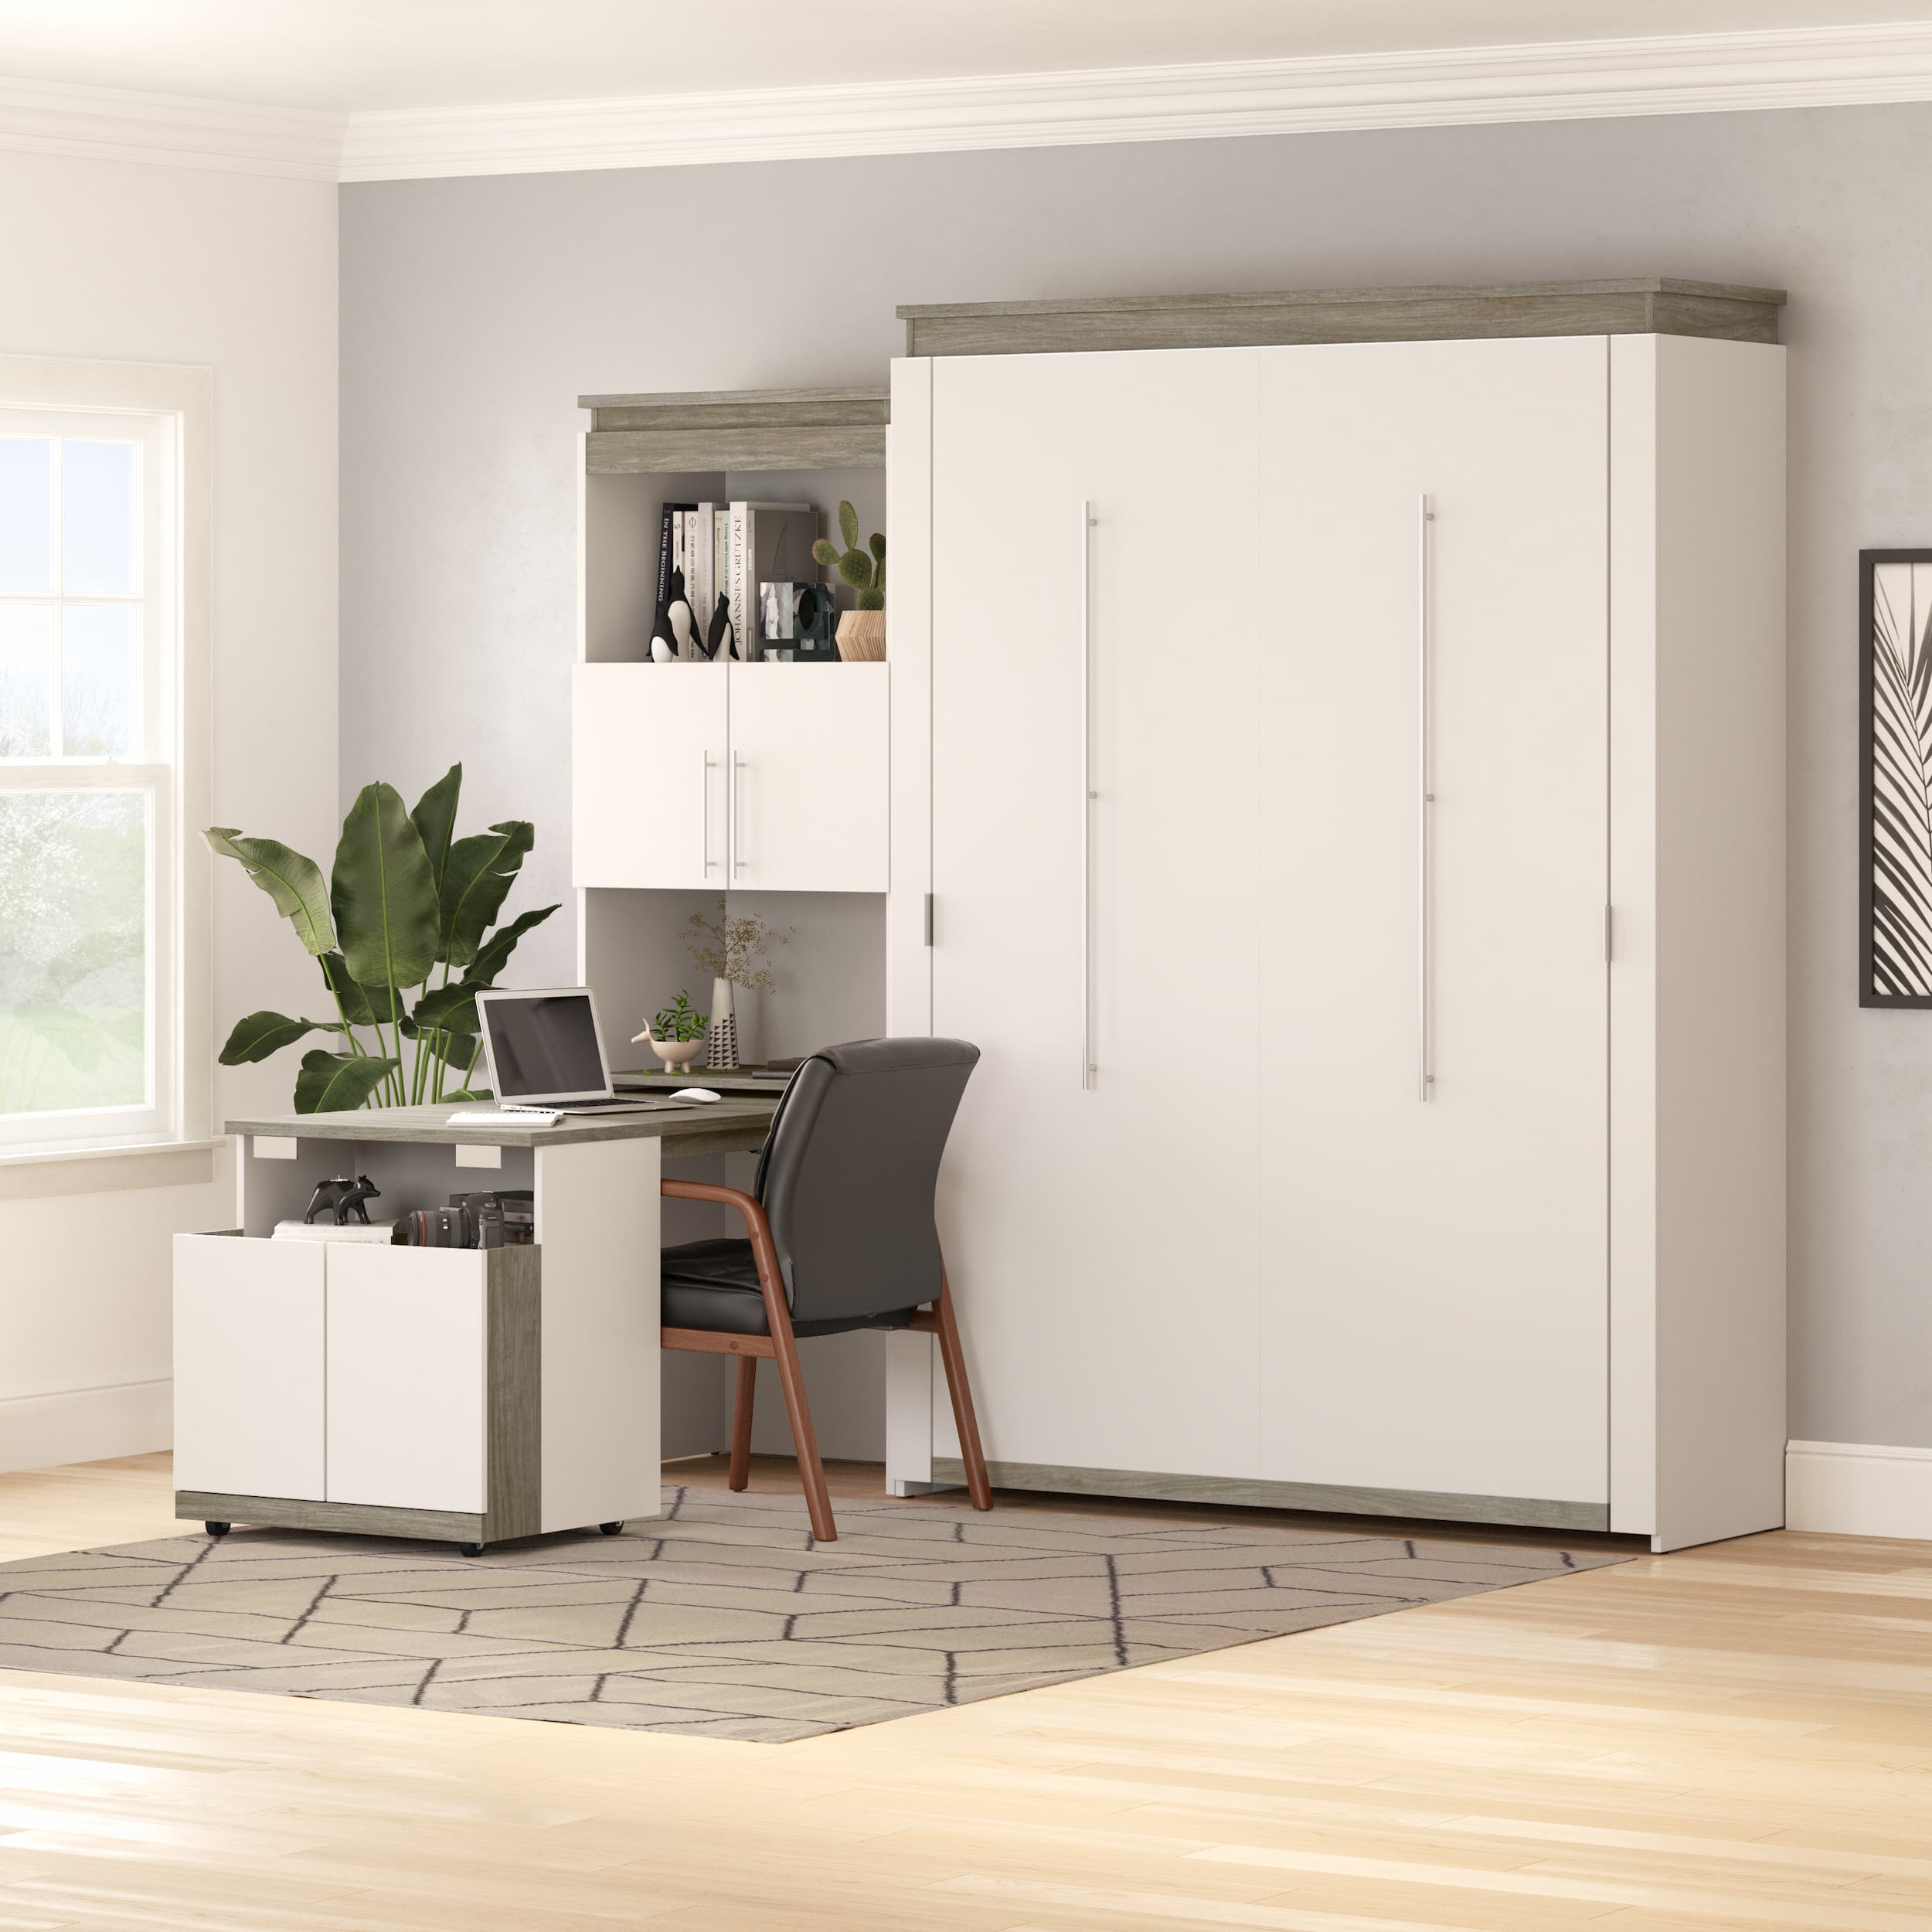 A space-saving, multipurpose Murphy bed with desk